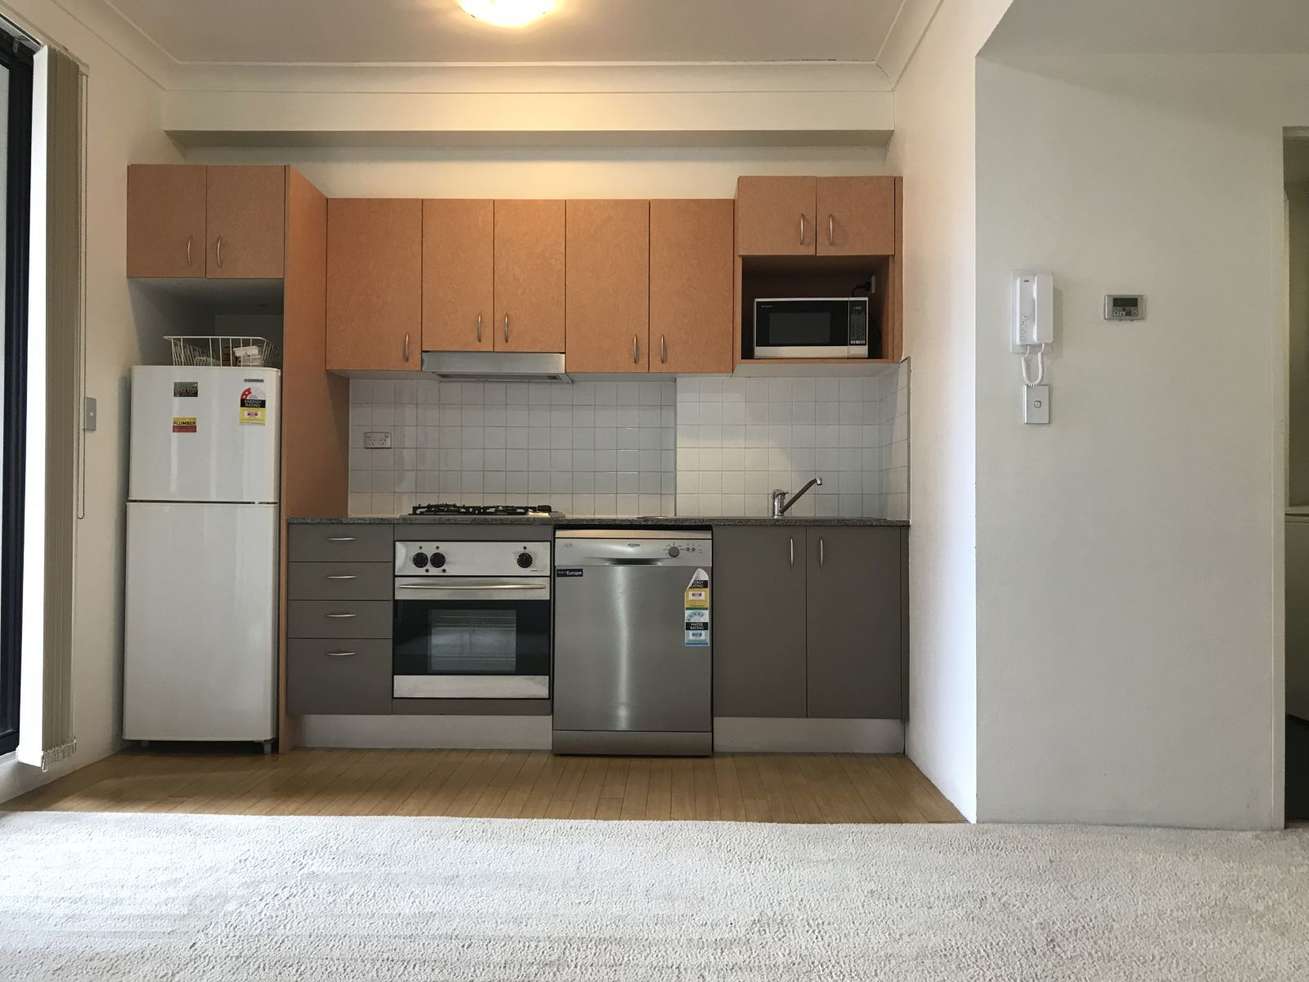 Main view of Homely apartment listing, 108/242 Elizabeth Street, Surry Hills NSW 2010